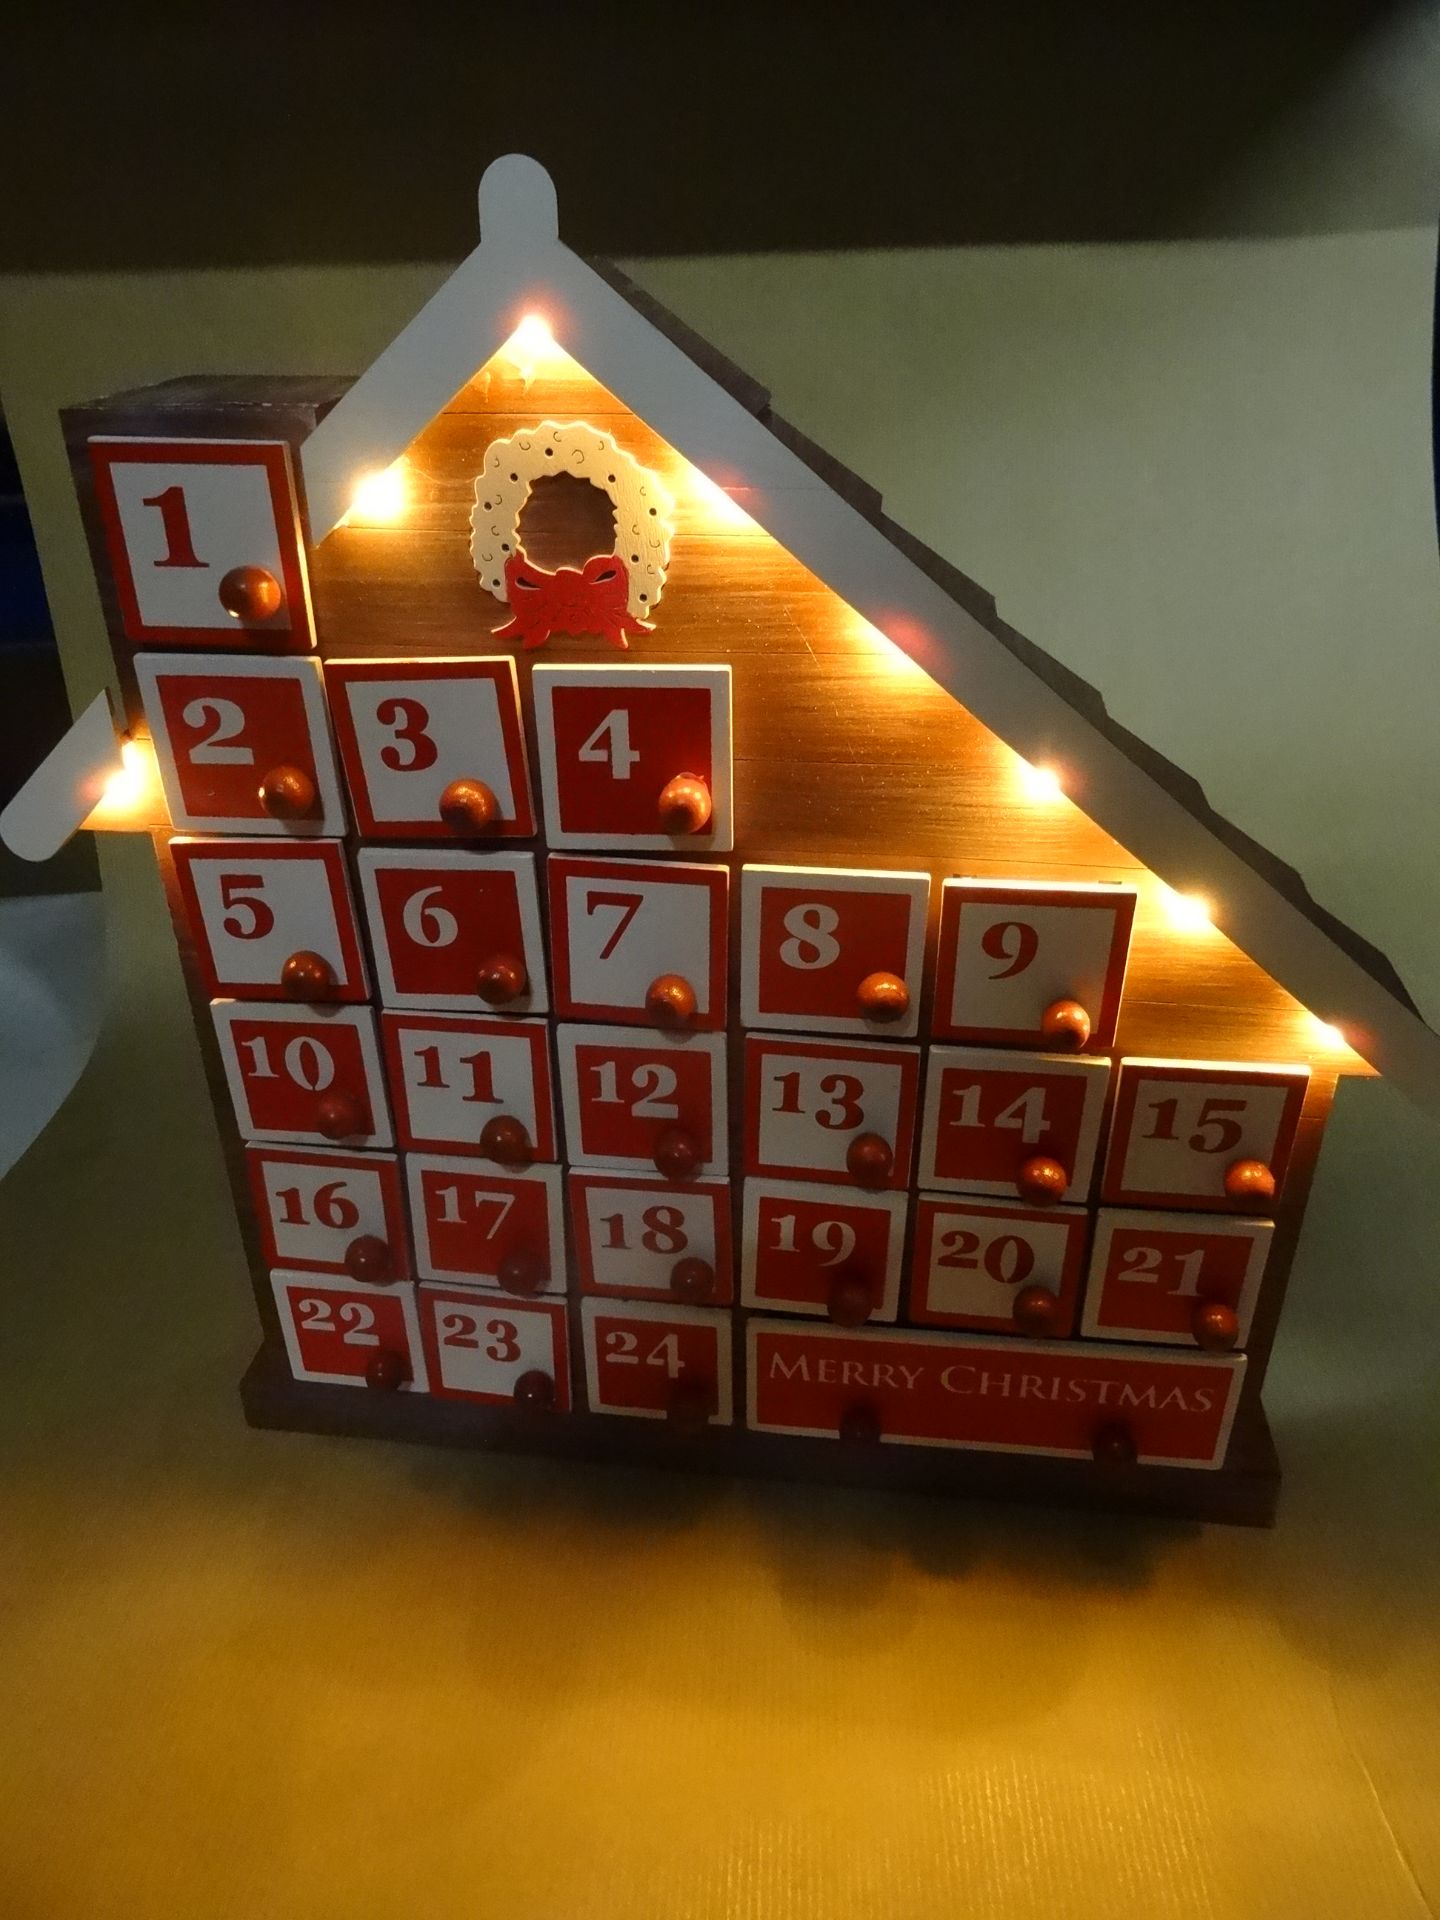 6 x The Christmas Workshop LED Light Up Wooden Advent Calender. Count down the days to christmas - Image 2 of 3